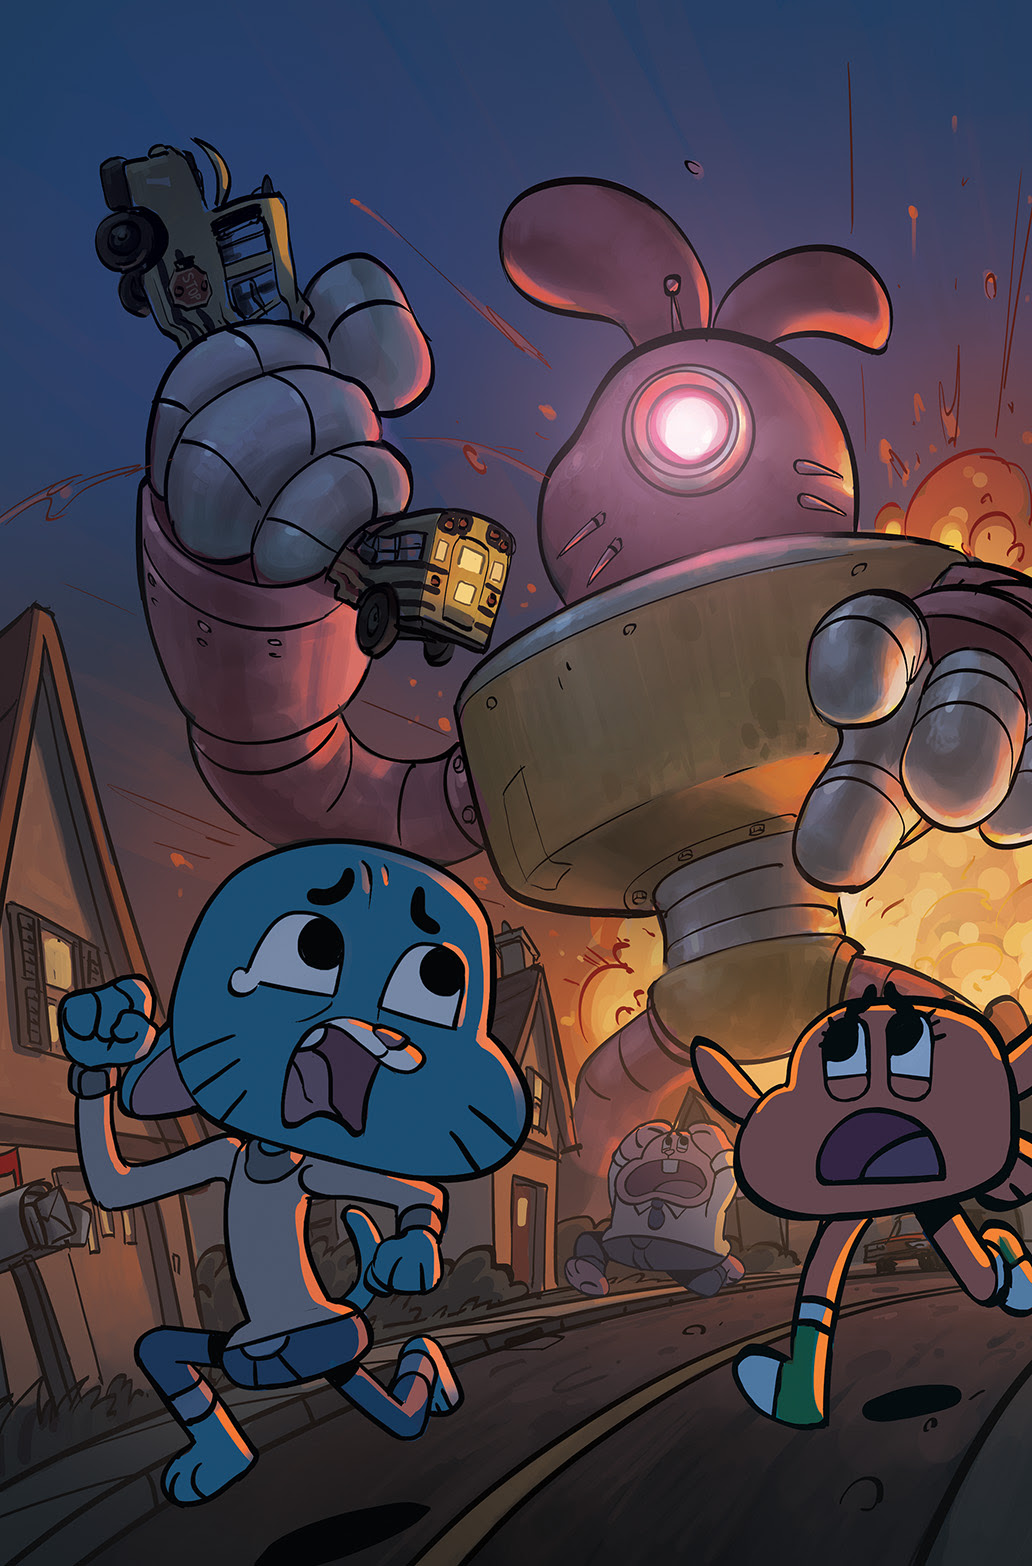 THE AMAZING WORLD OF GUMBALL #4 Cover C by Justin Oaksford